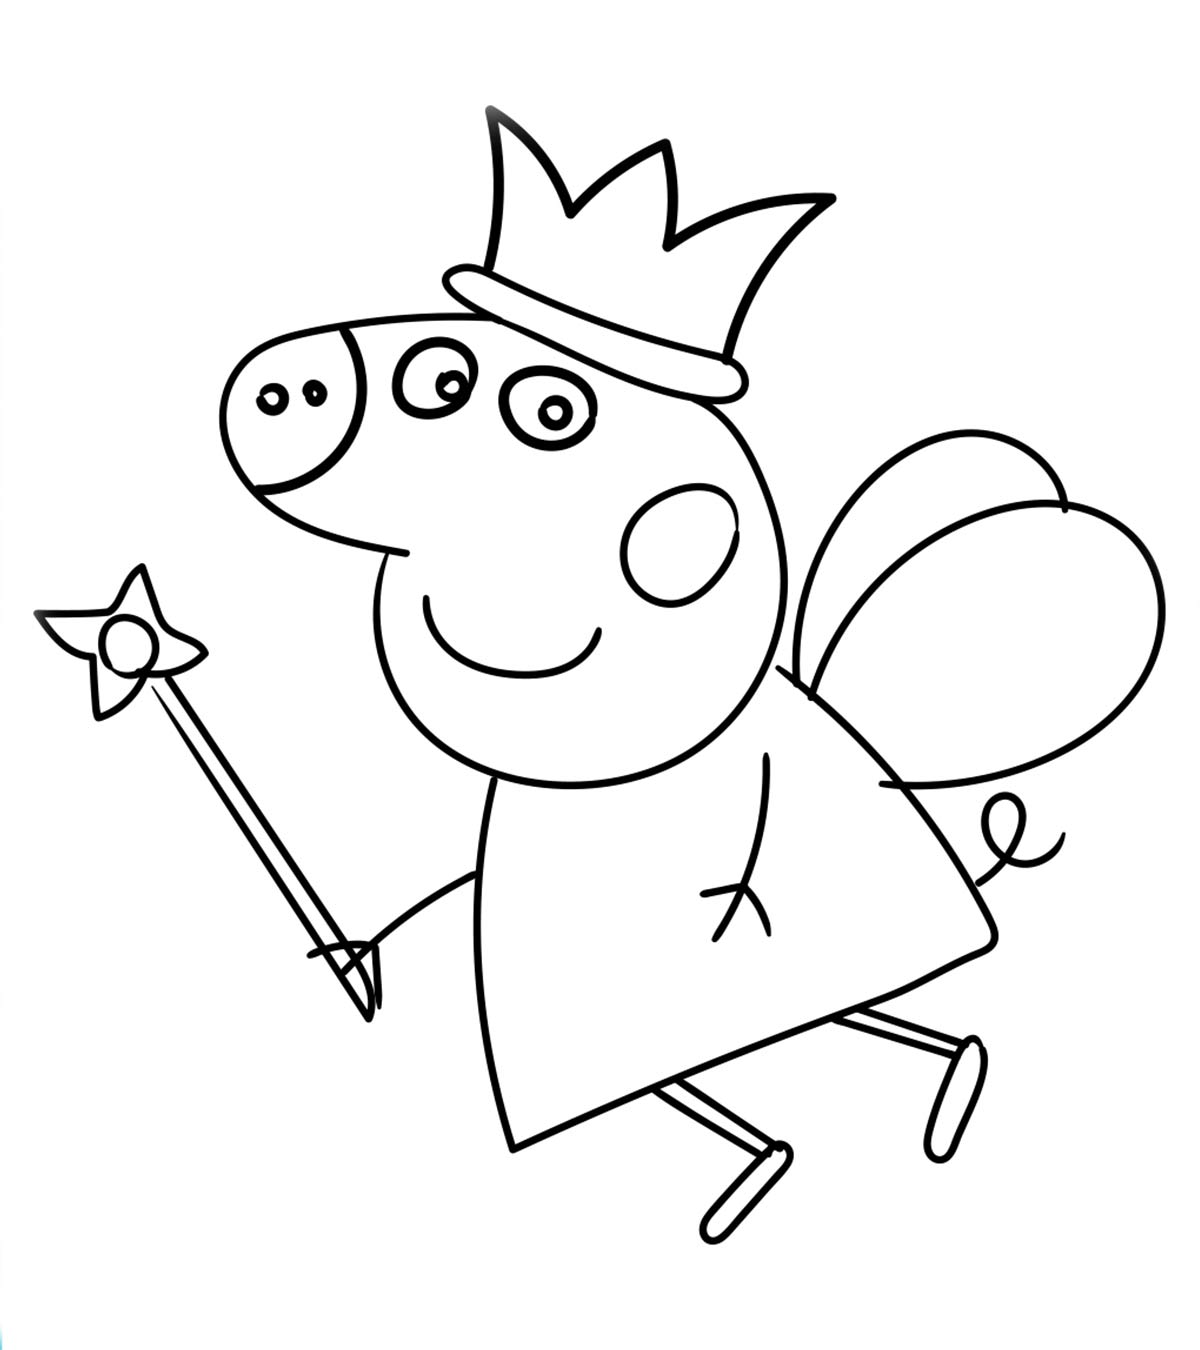 How to Draw Peppa Pig with StepbyStep Pictures